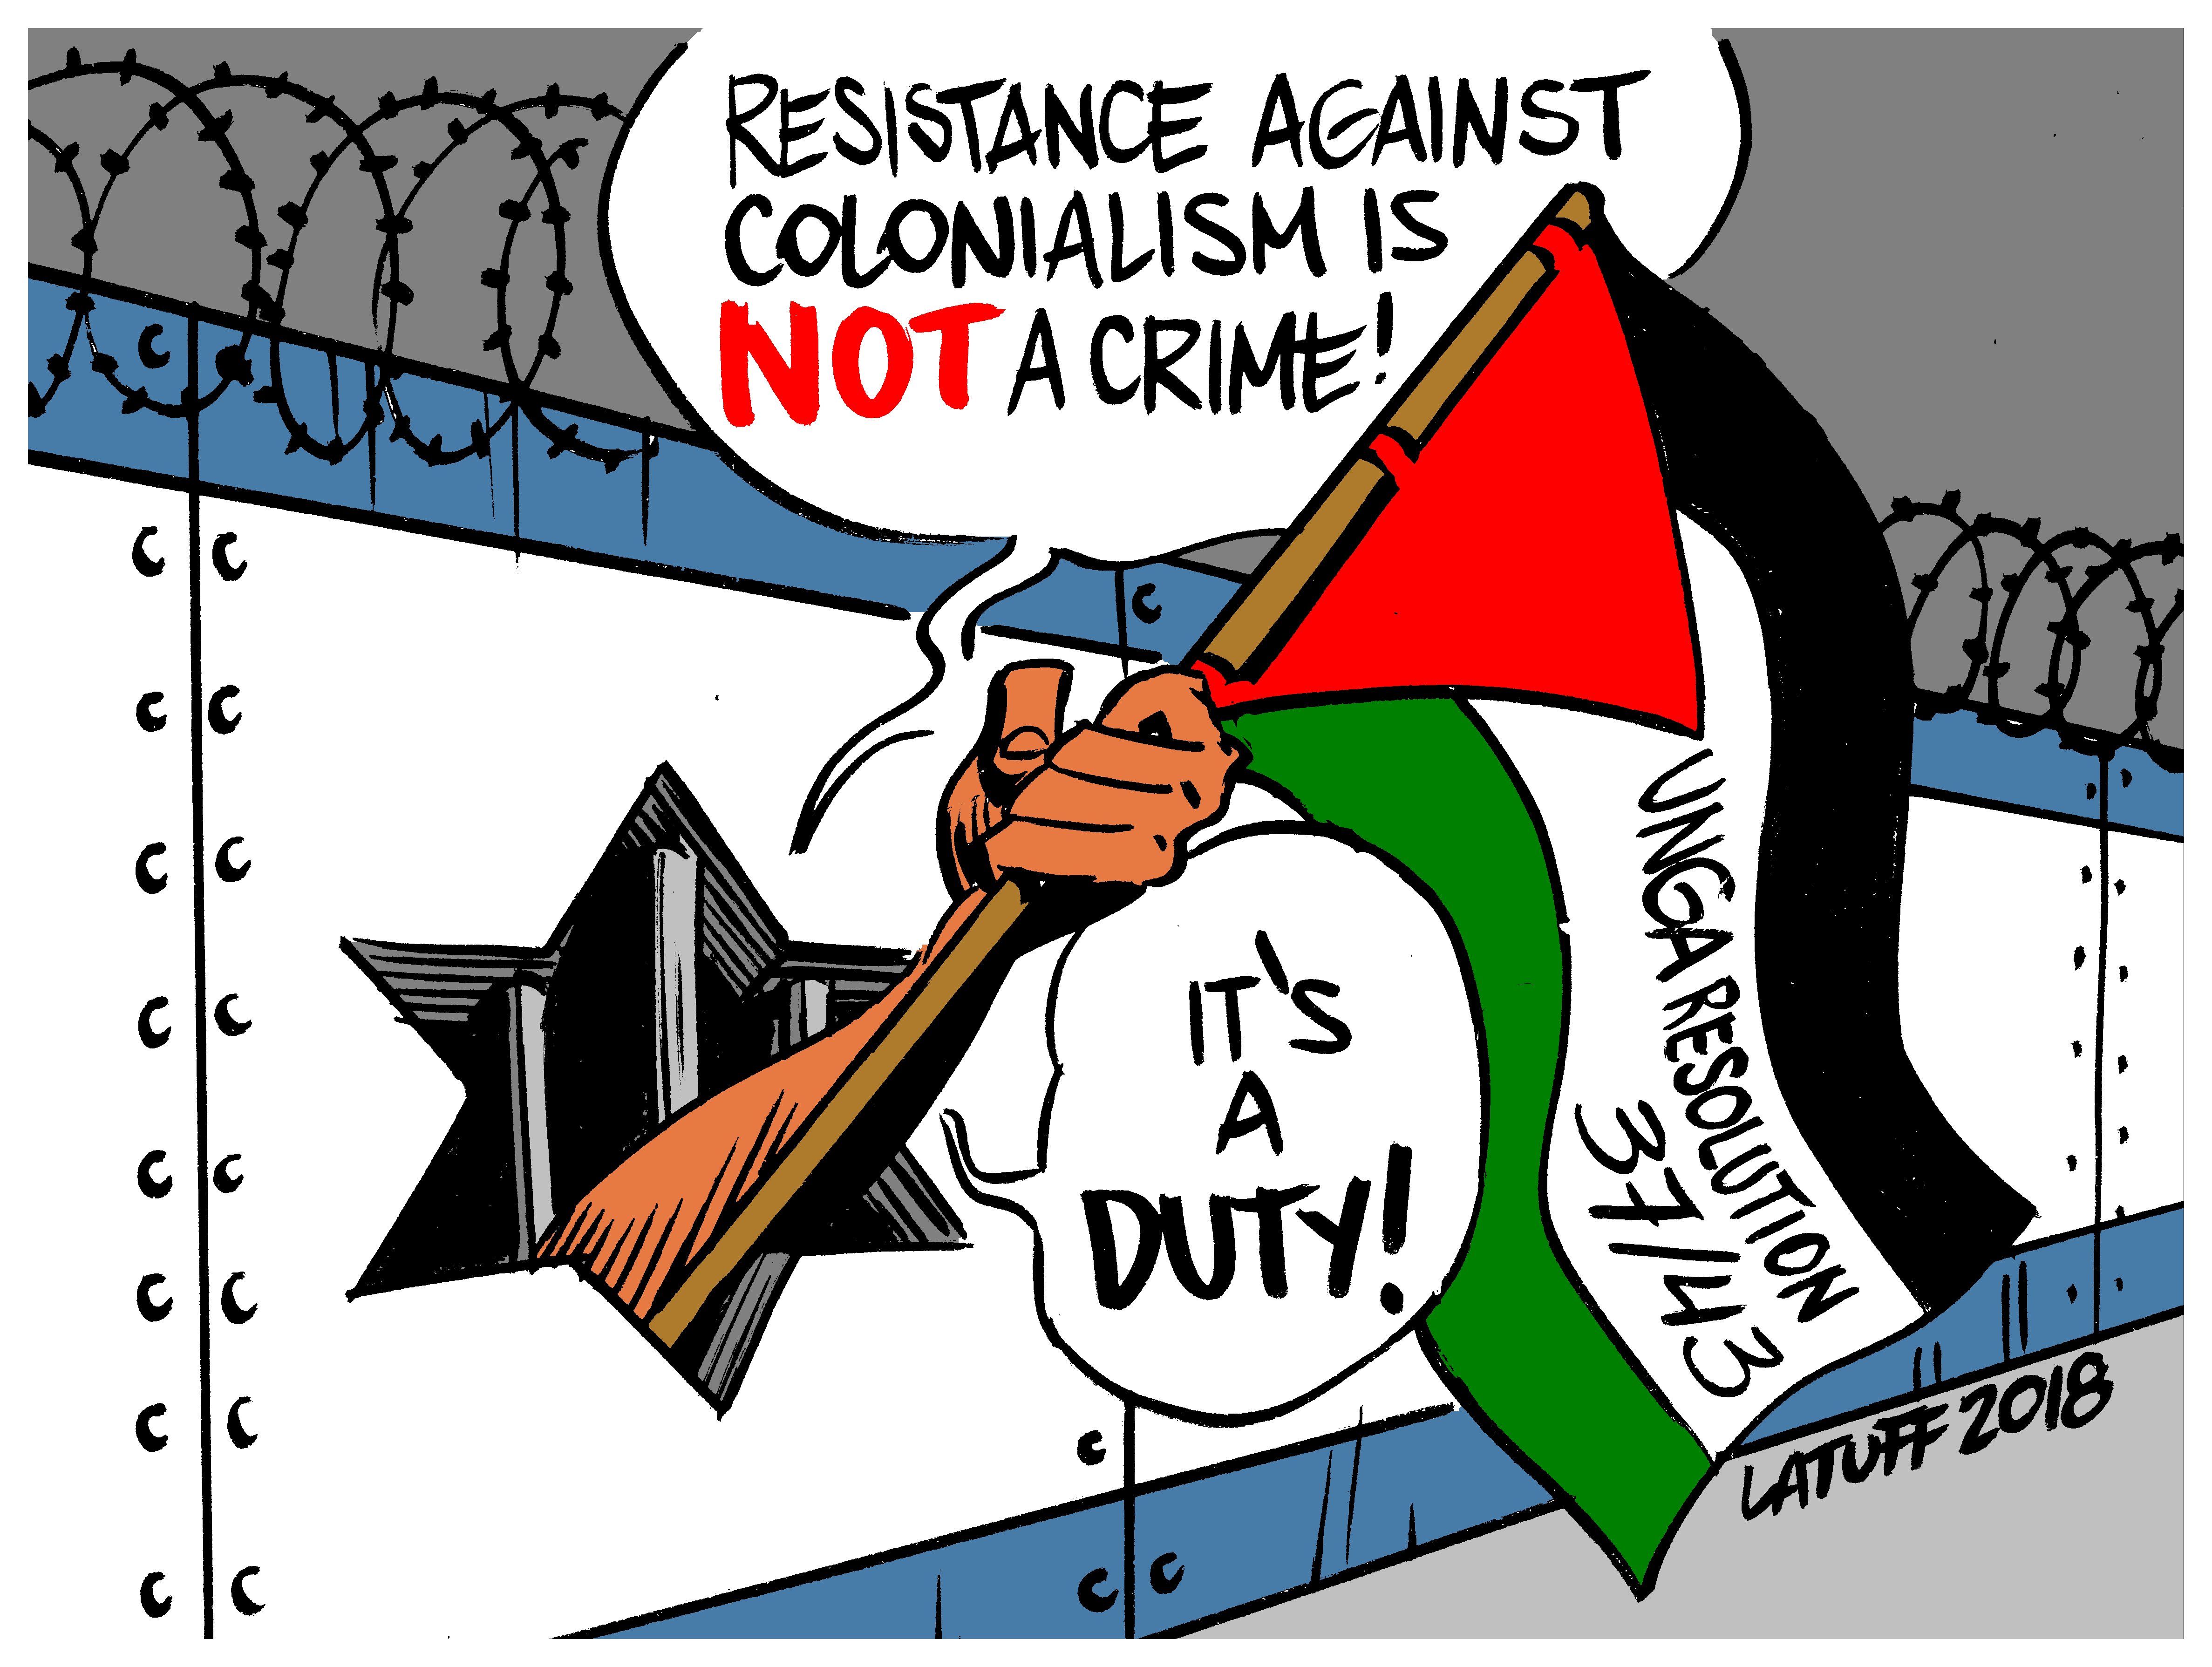 Resistance against colonialism is NOT a crime it is a DUTY Palestine Israel